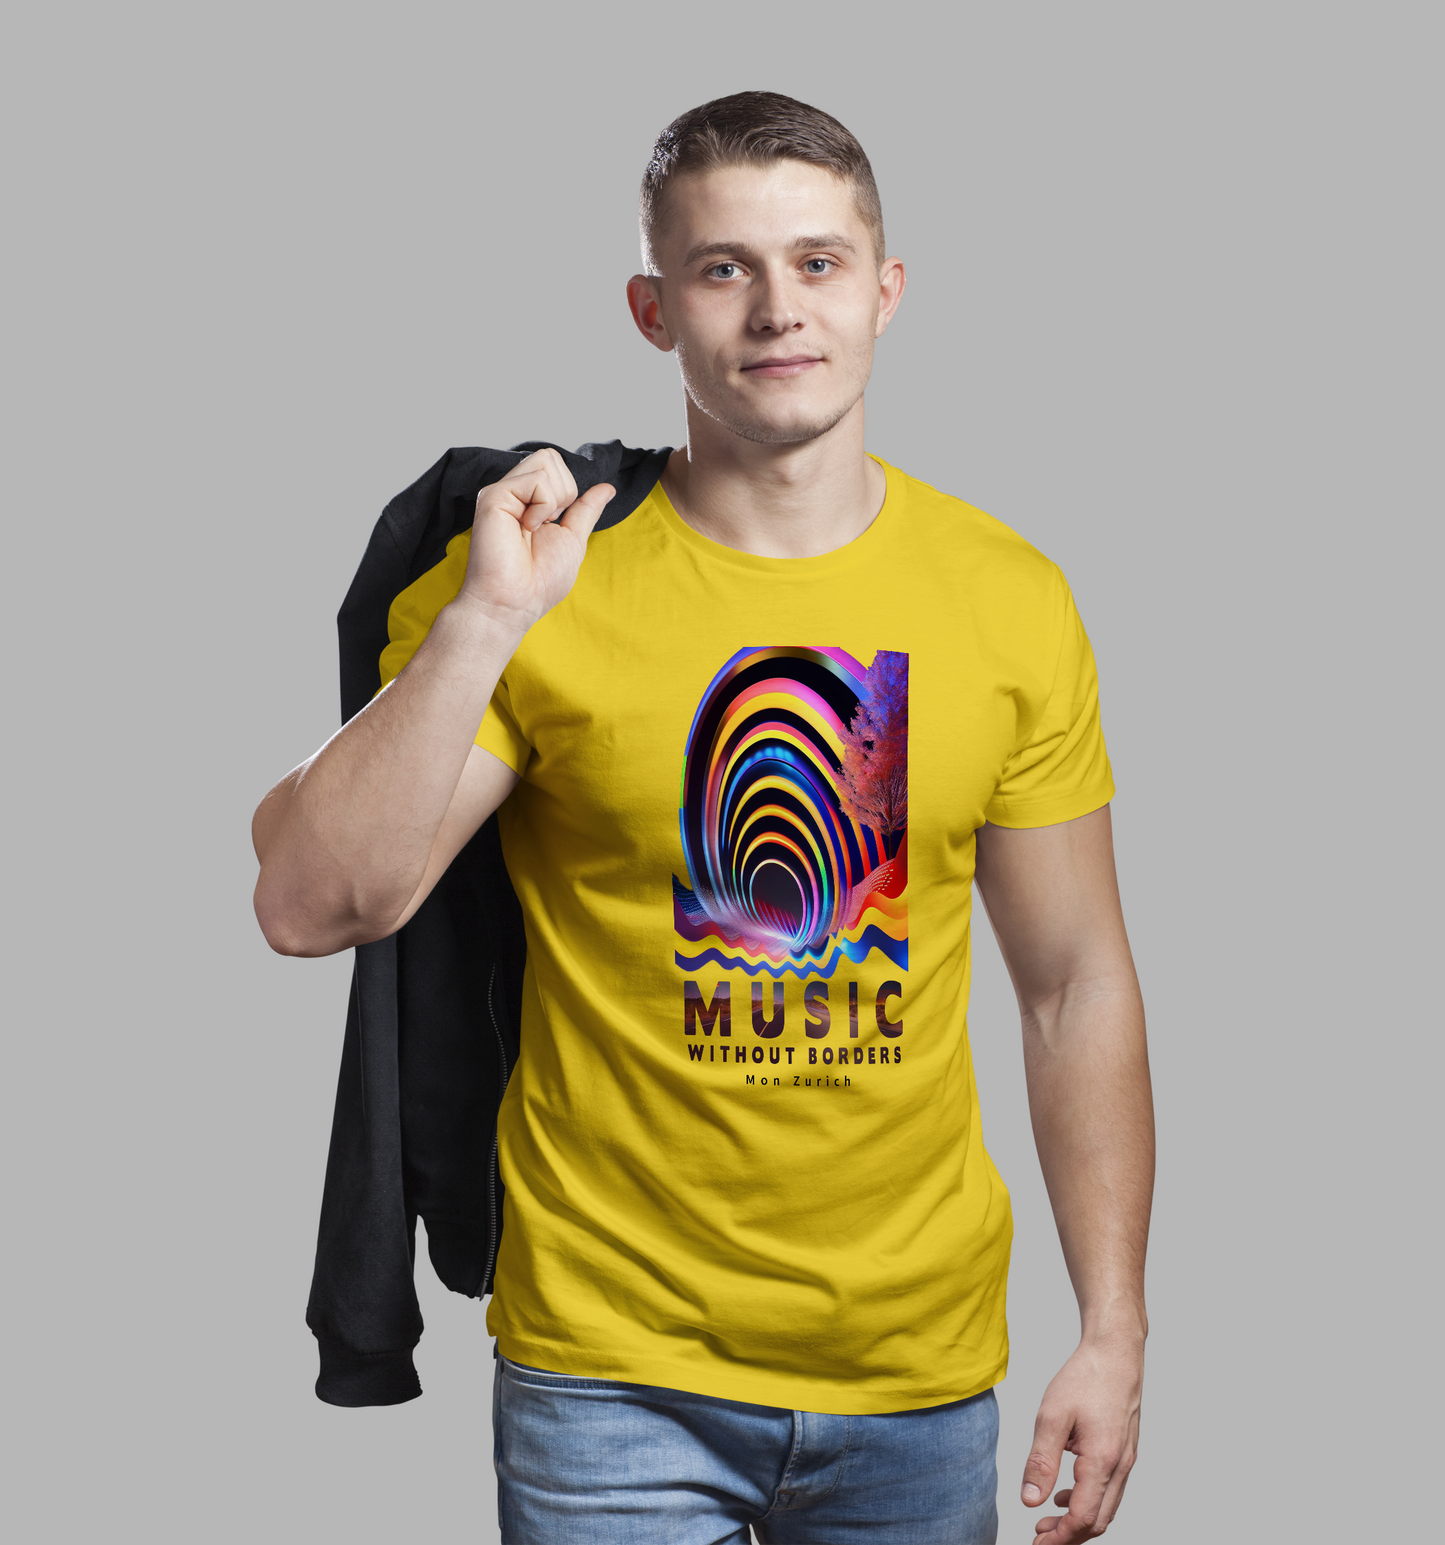 Music without Borders T-shirt in Light - Mon Zurich Originals